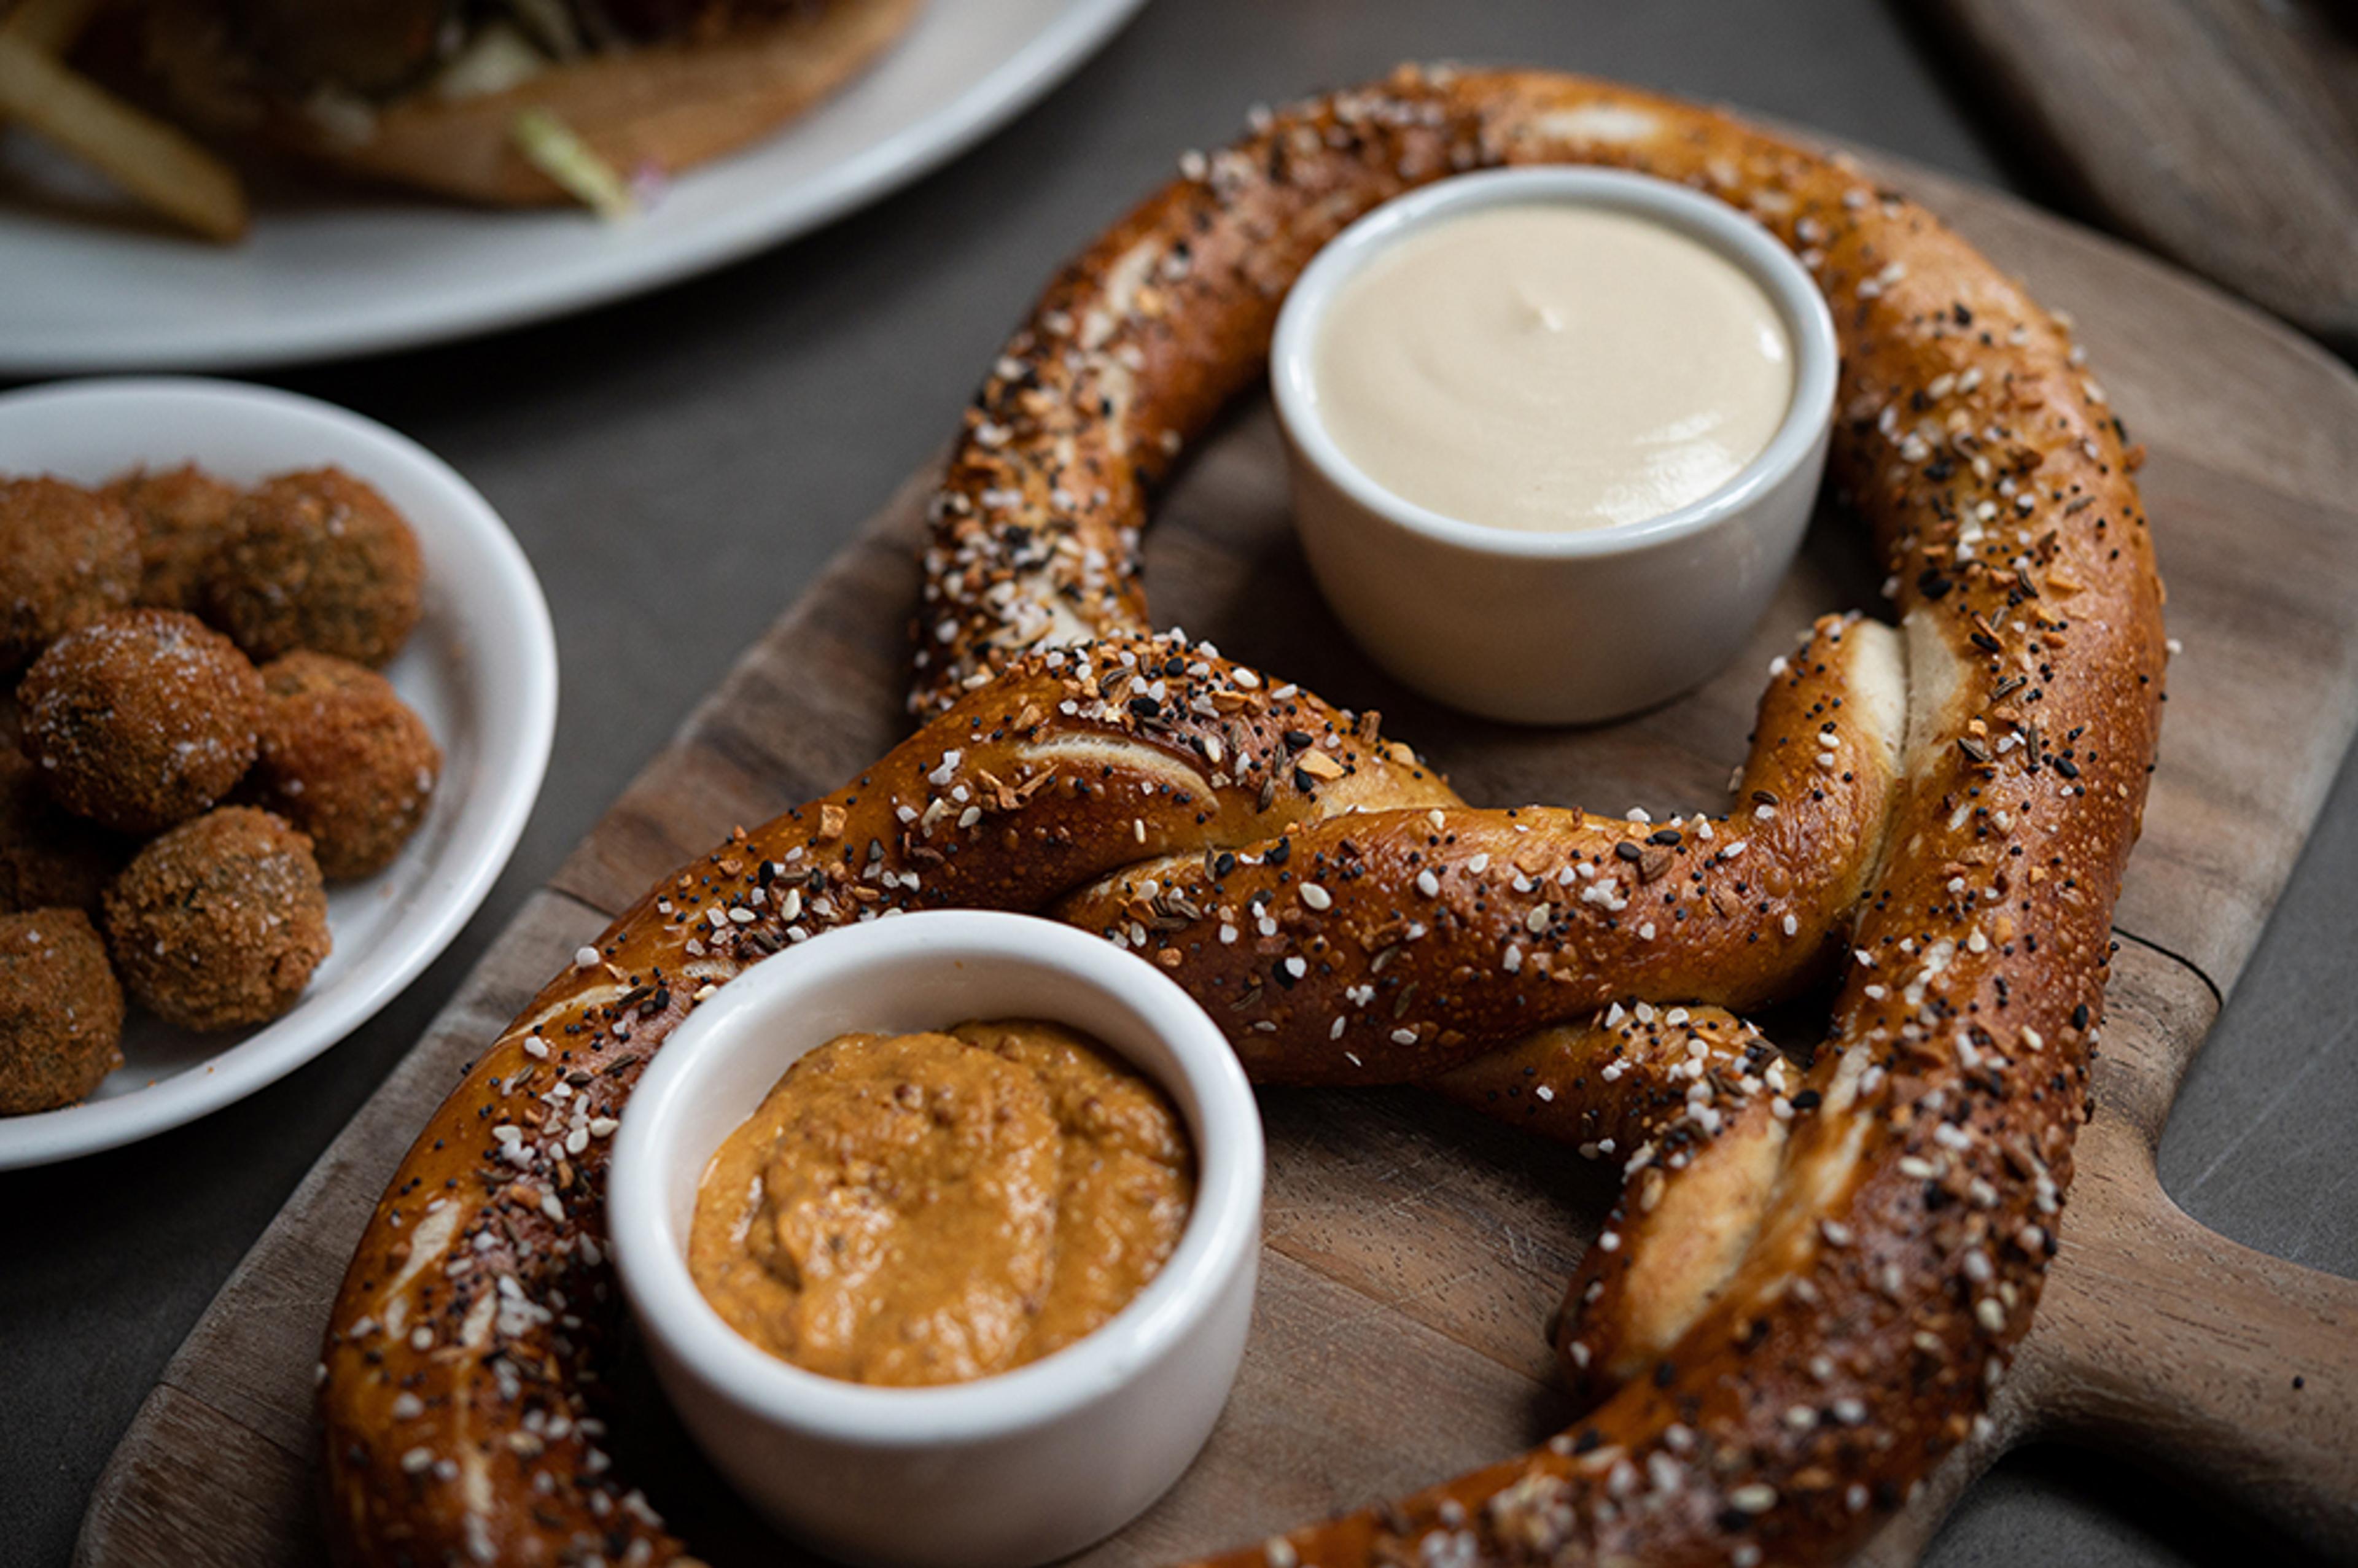 large pretzel with cheese sauce and house mustard